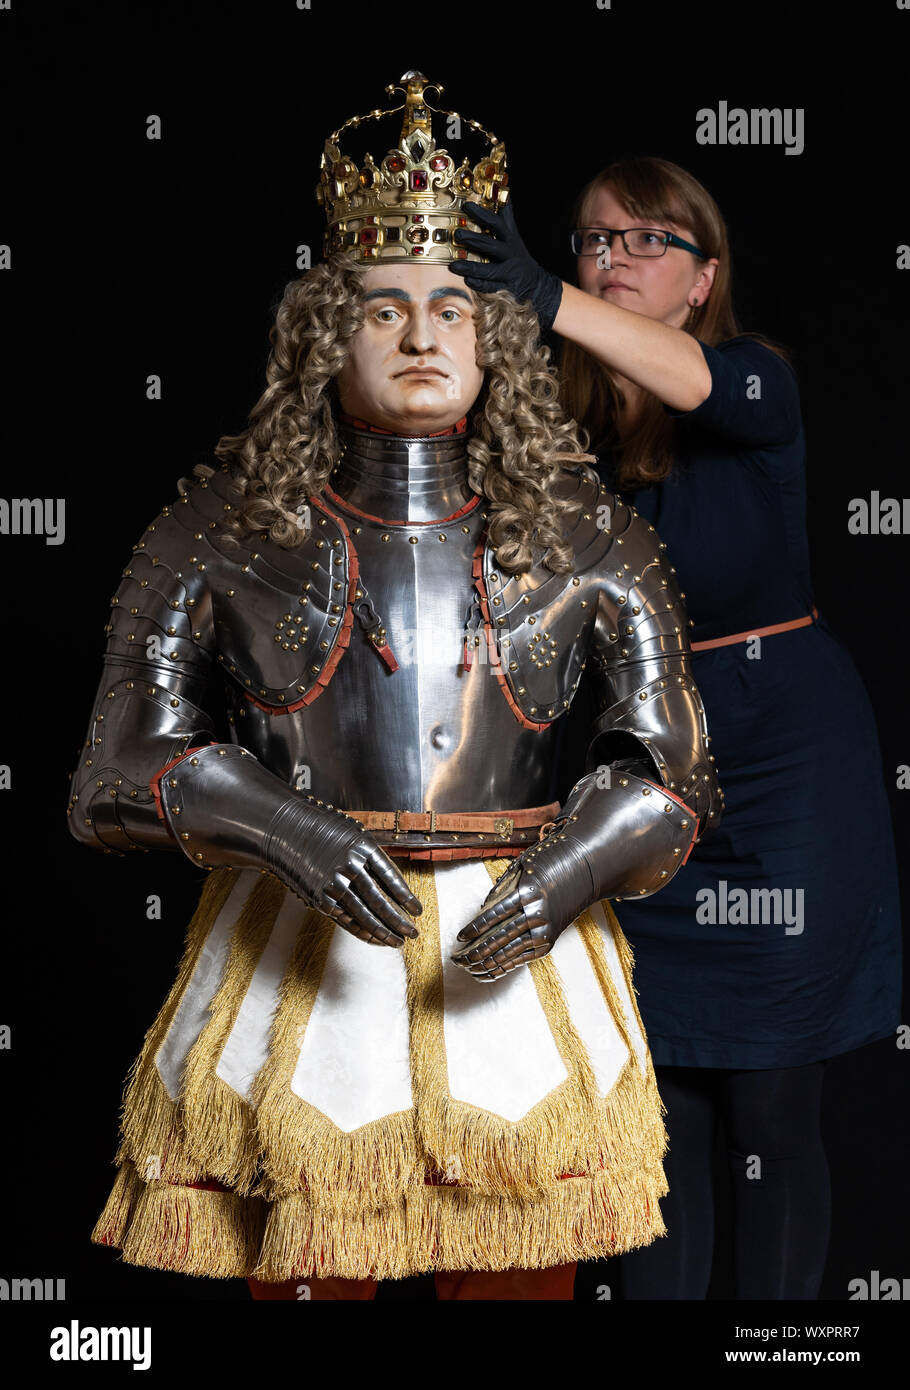 Dresden, Germany. 15th Aug, 2019. Stefanie Penthin, restorer in the armoury of the Staatliche Kunstsammlungen Dresden (SKD), crowned the coronation figure of August the Strong in the coronation ornament of 1697. The figure will be an exhibit of the new exhibition in the Royal Parade Rooms of the Residence Palace. Credit: Robert Michael/dpa-Zentralbild/dpa/Alamy Live News Stock Photo